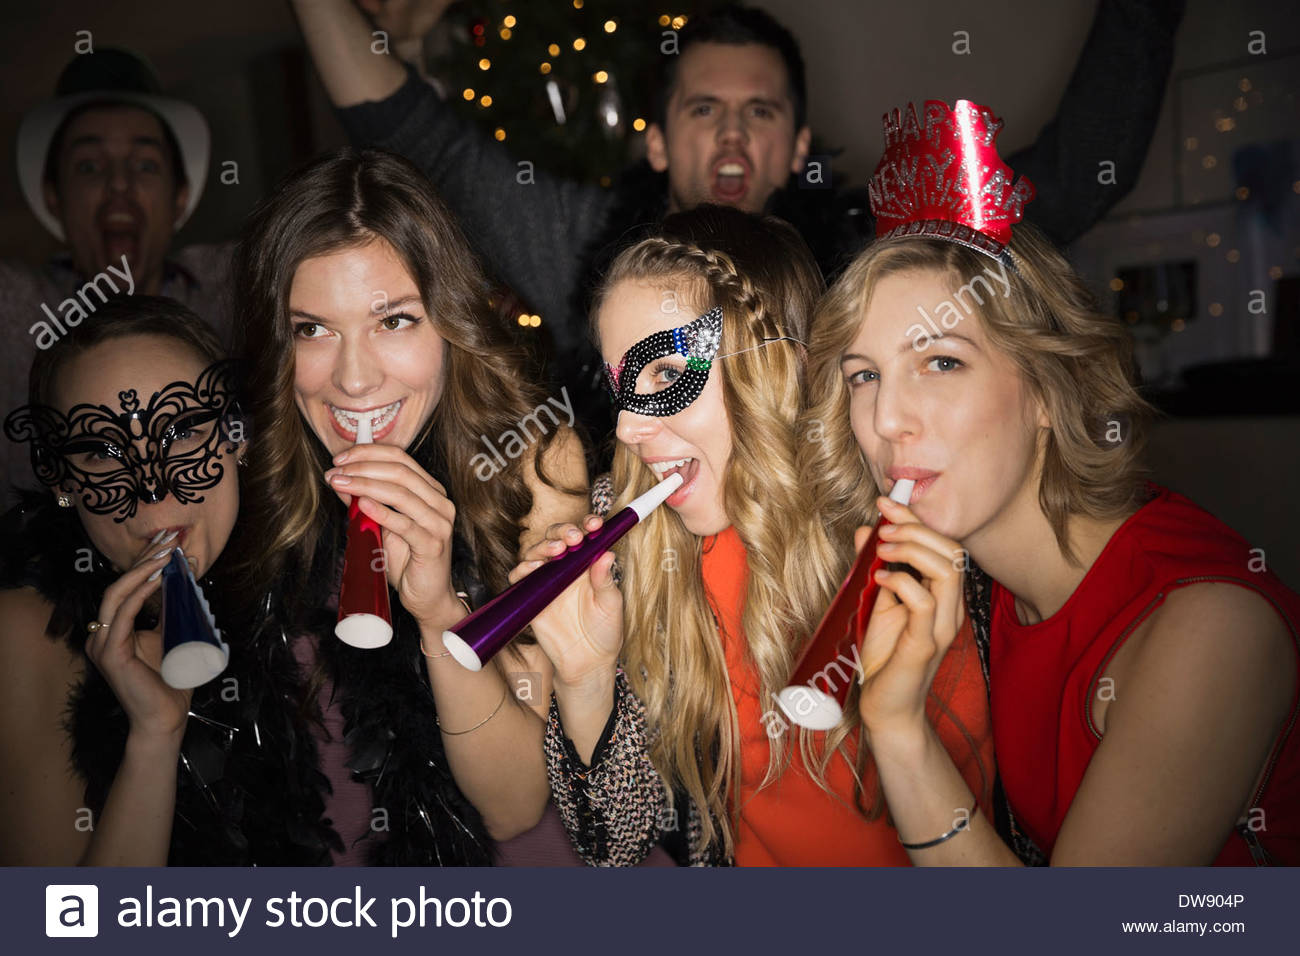 Group of female friends enjoying New Years Eve party Stock Photo